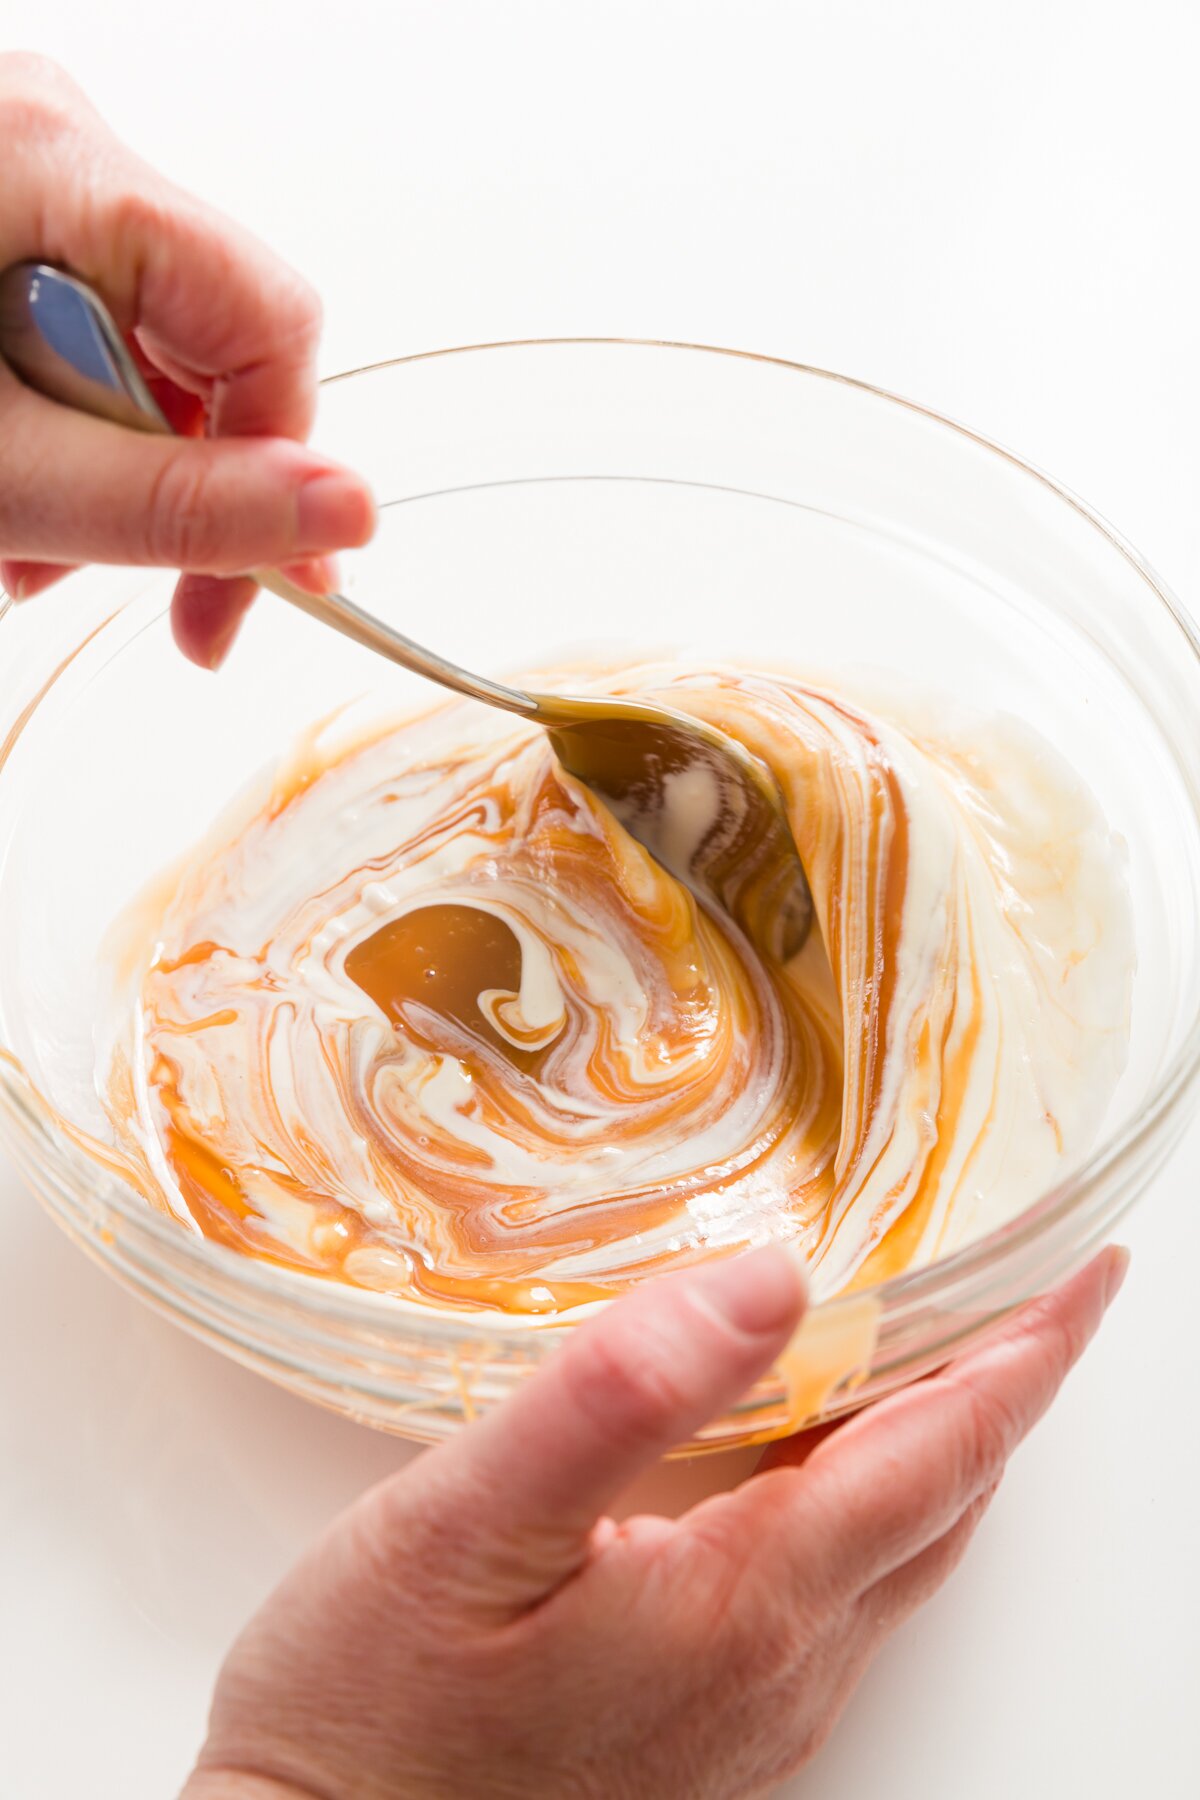 Mixing dulce de leche into cheesecake batter in a small glass bowl